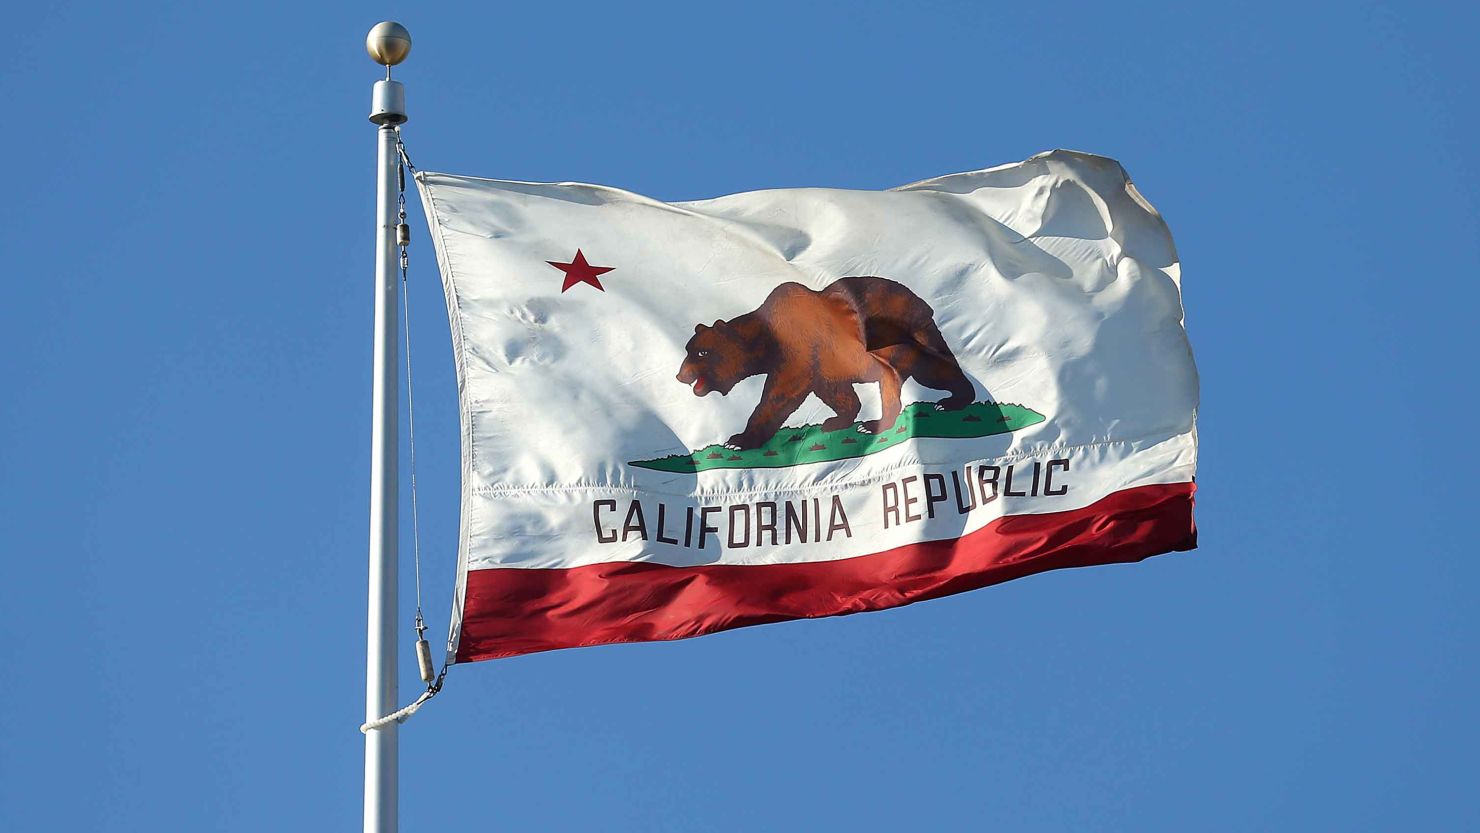 Interest in pushing for California's secession increased after Donald Trump won the presidency.